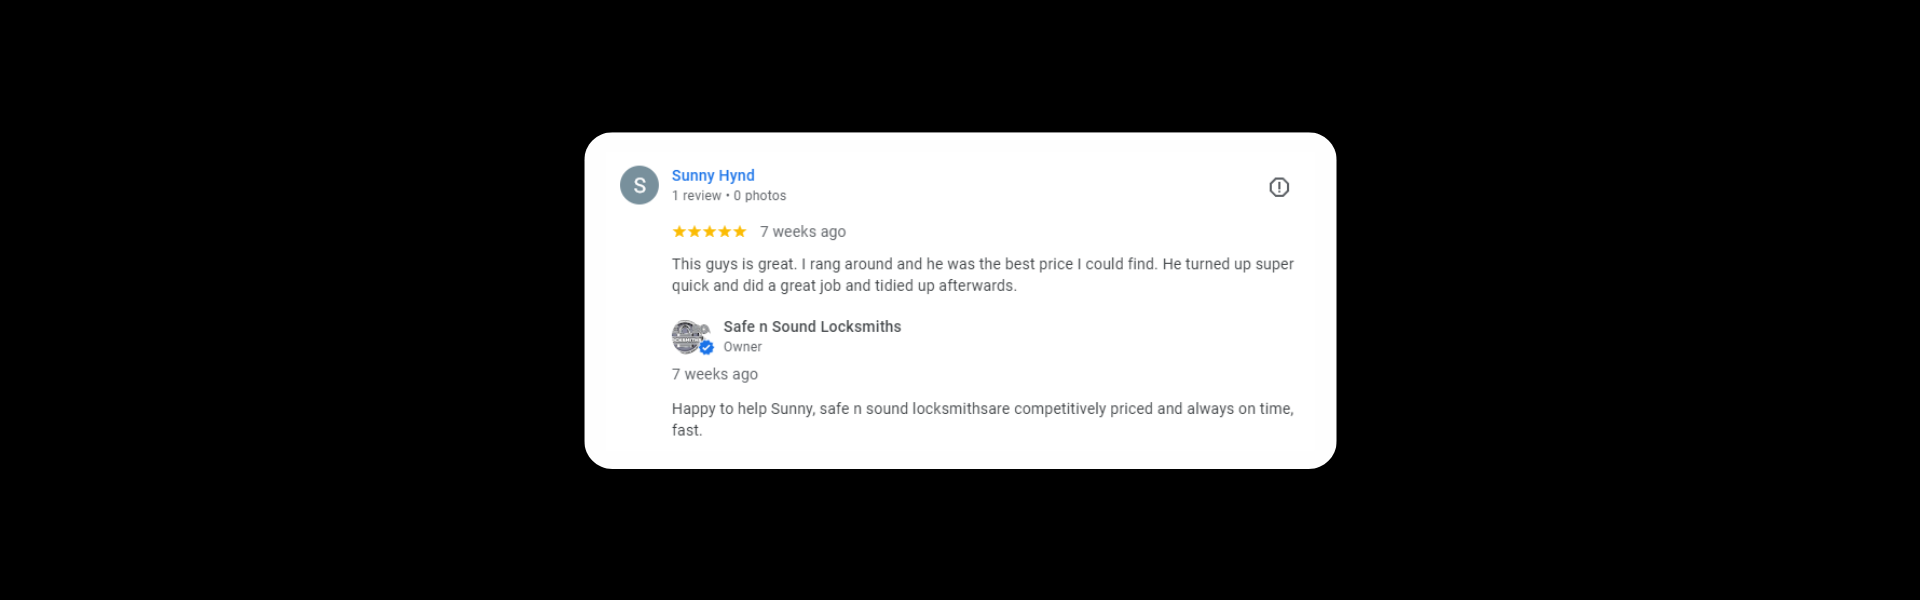 Sunny Hynd 1 review a month ago This guys is great. I rang around and he was the best price I could find. He turned up super quick and did a great job and tidied up afterwards. Response from the owner a month ago Happy to help Sunny, safe n sound locksmiths are competitively priced and always on time, fast.